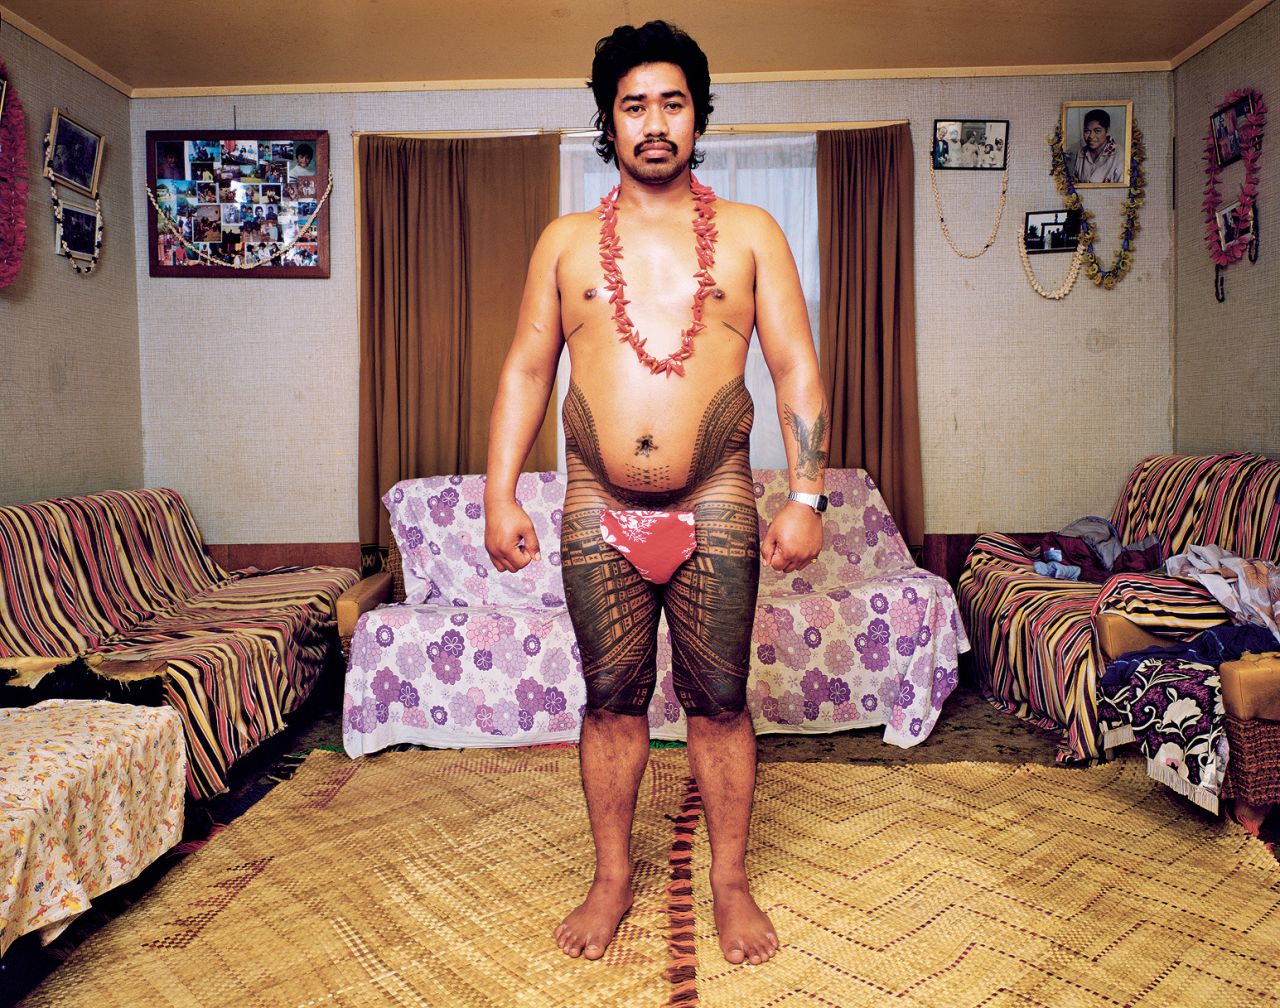 A Samoan man shows off his traditional pe'a, or ritual tattoos that are a marker of manhood.